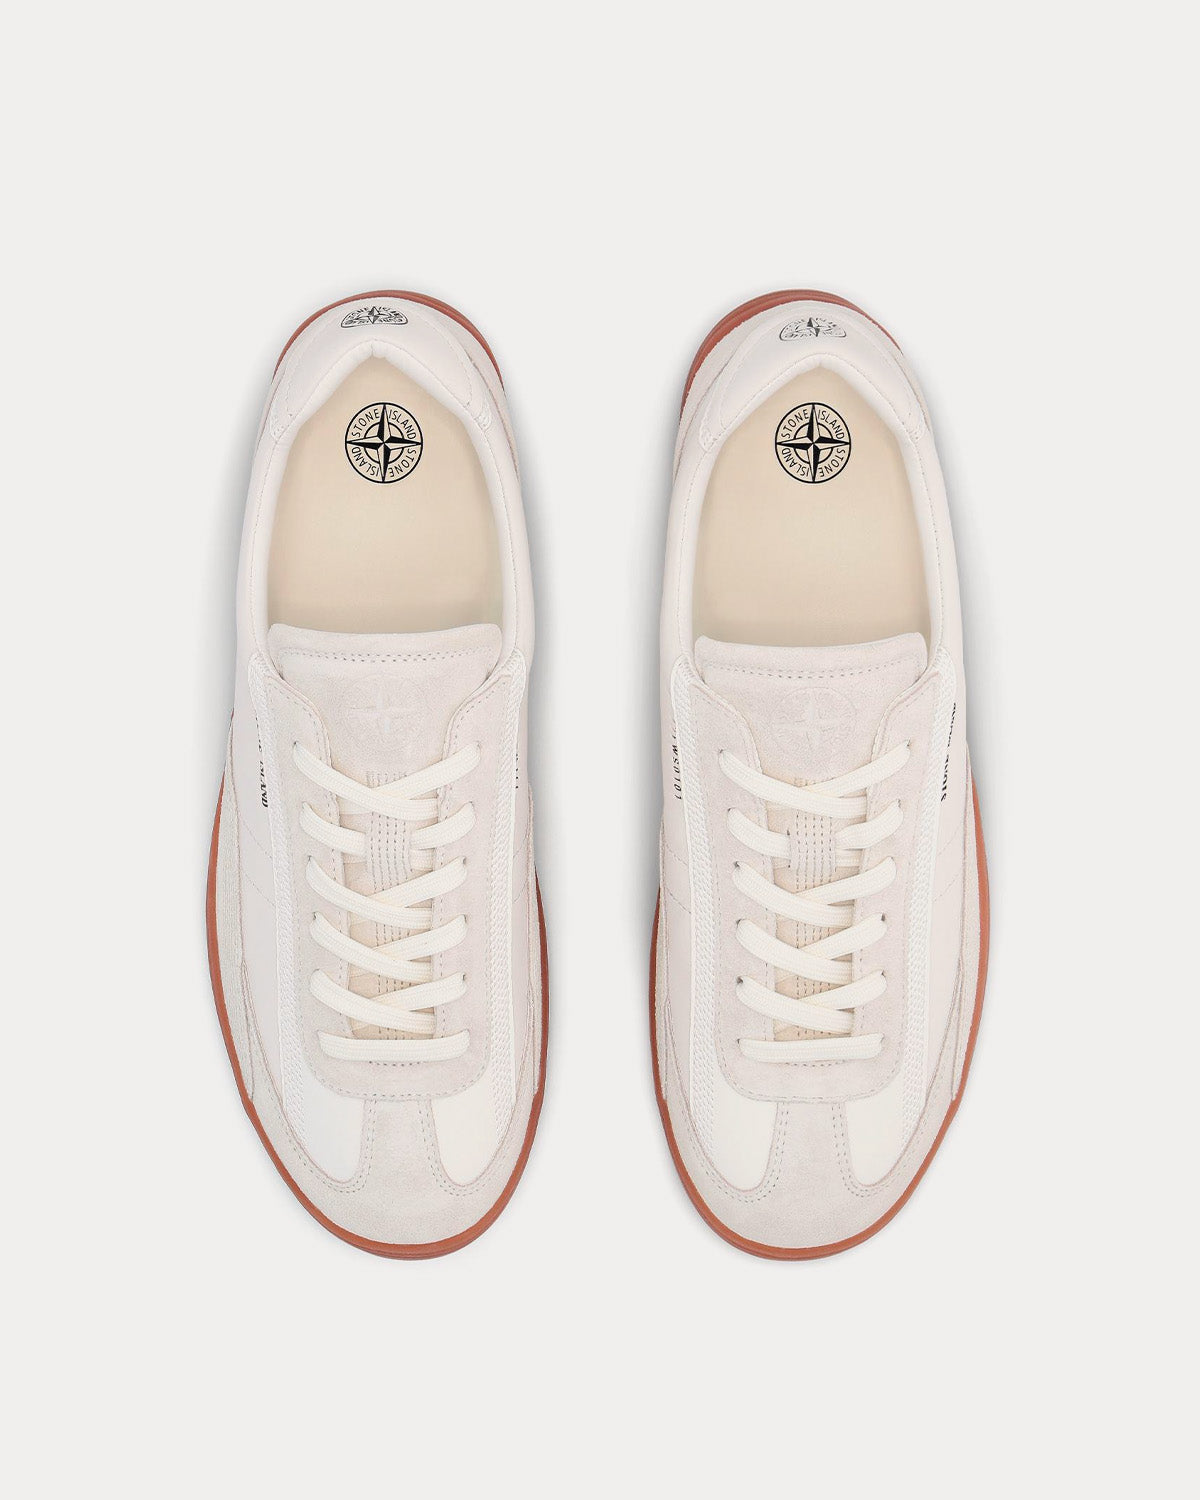 Stone Island - S0301 White Low Top Sneakers